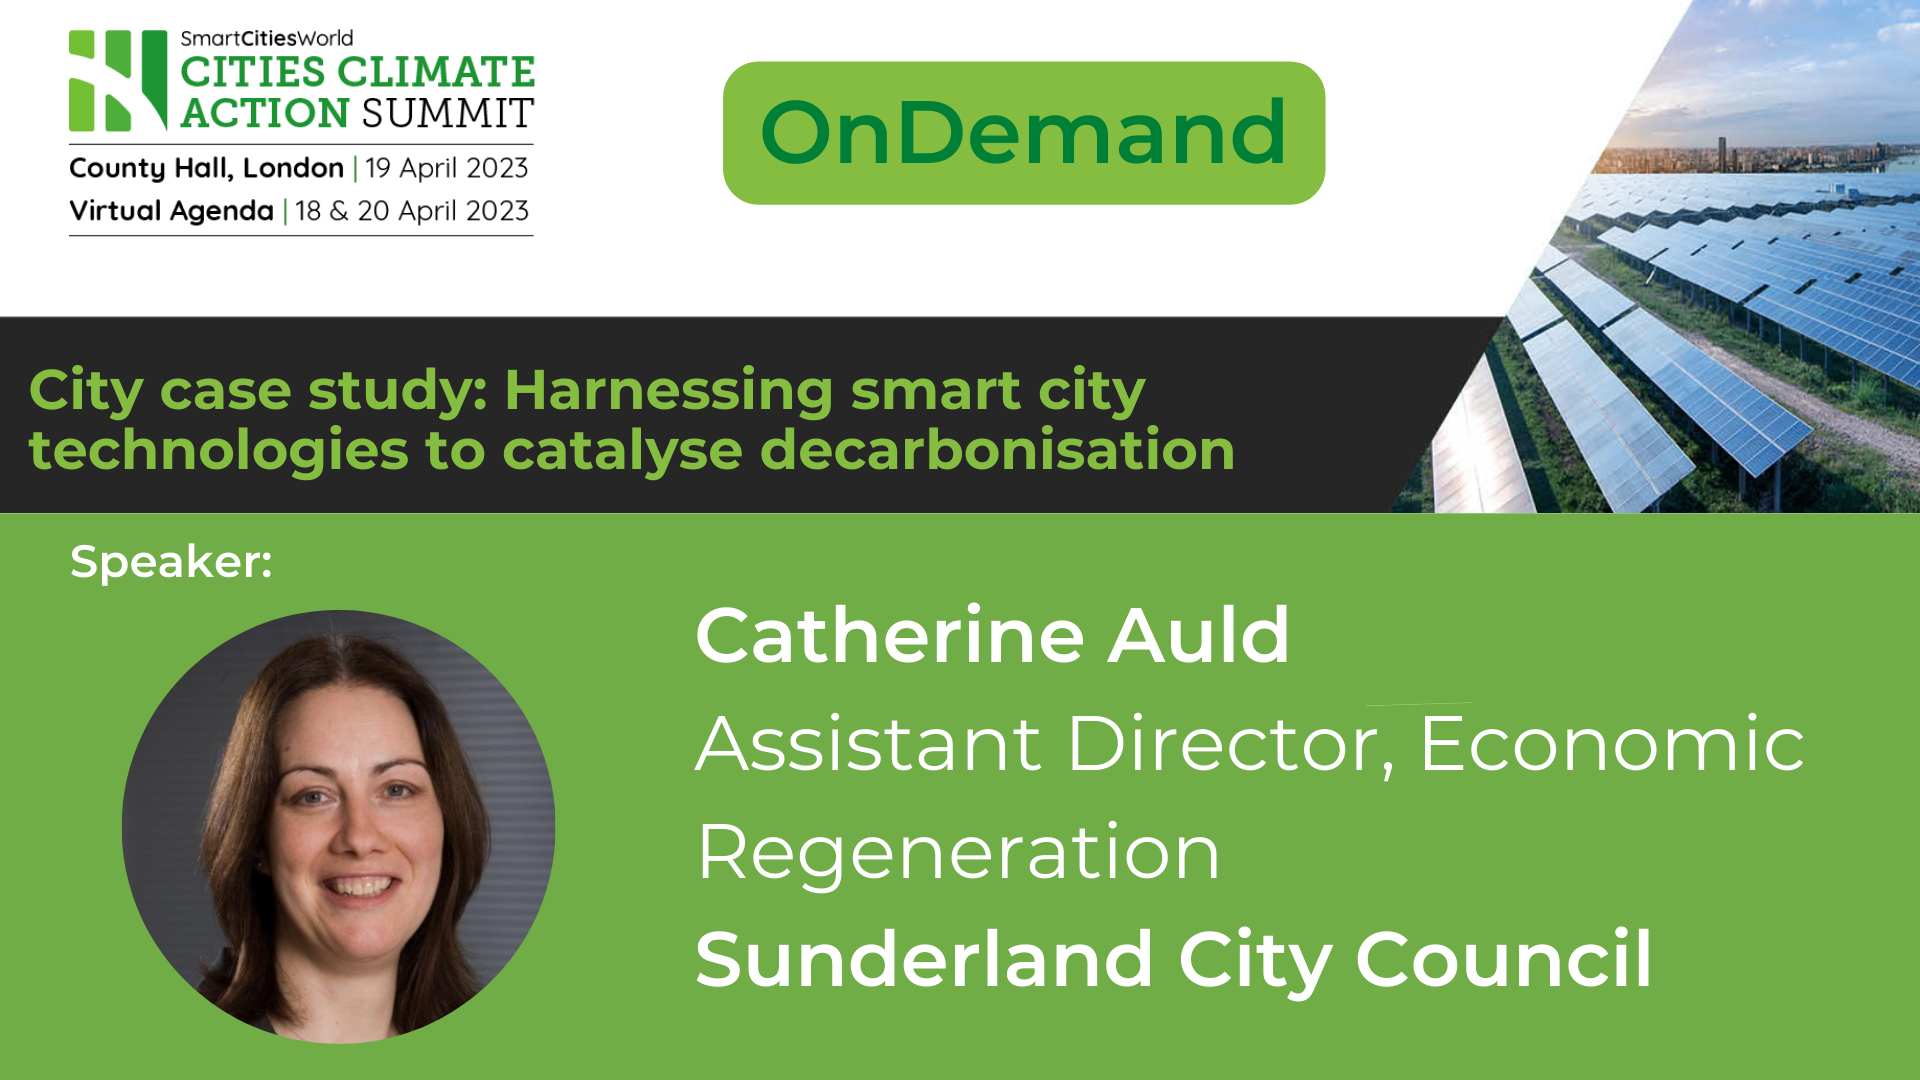 OnDemand Case study: Harnessing smart city technologies to catalyse decarbonisation